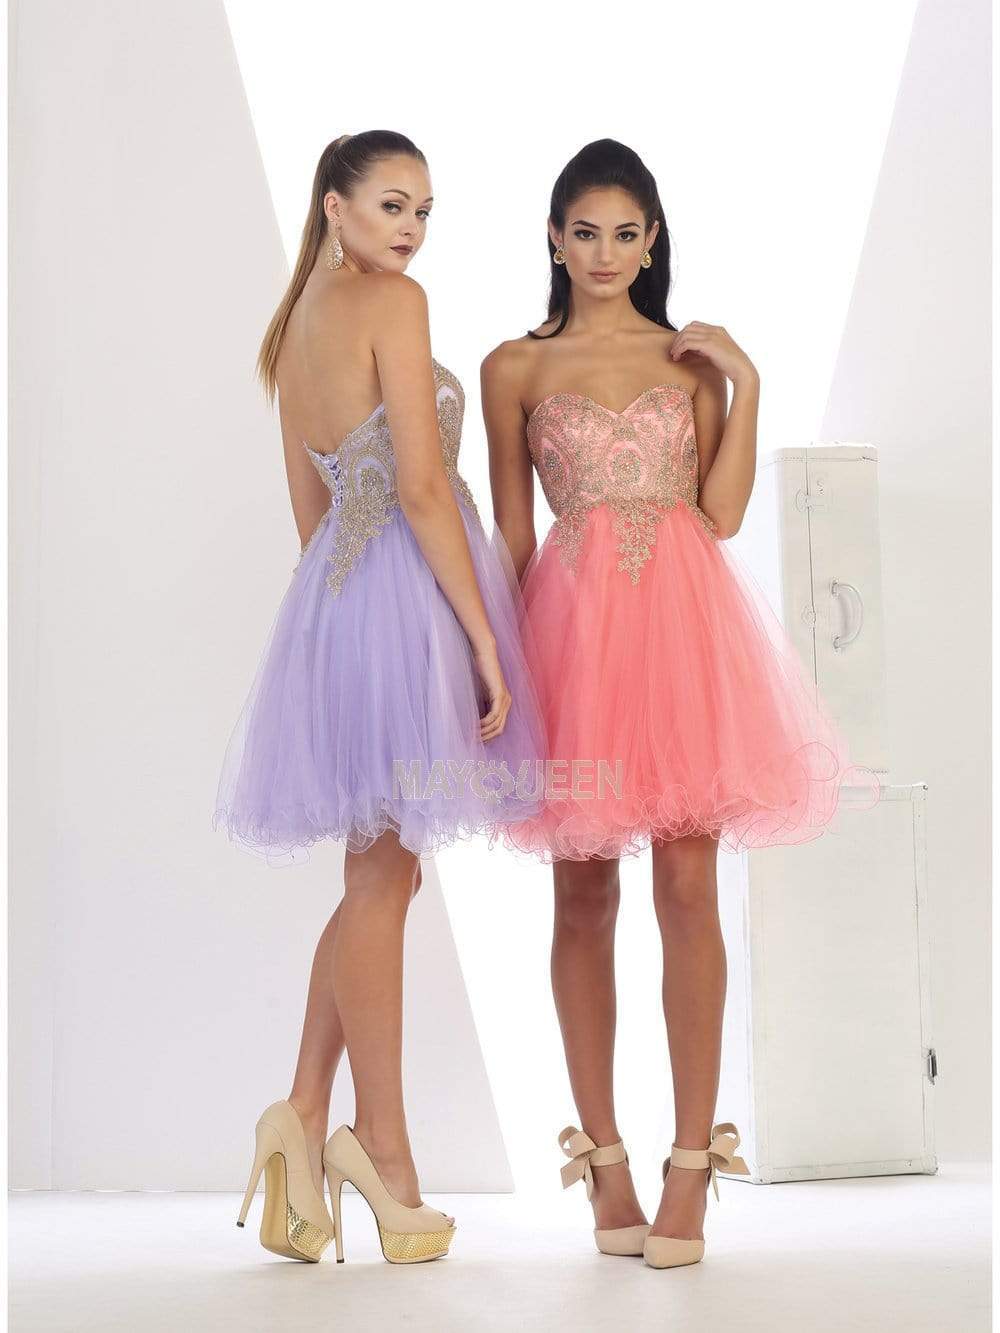 May Queen - MQ1414 Lace Appliqued Strapless Sweetheart Cocktail Dress Homecoming Dresses